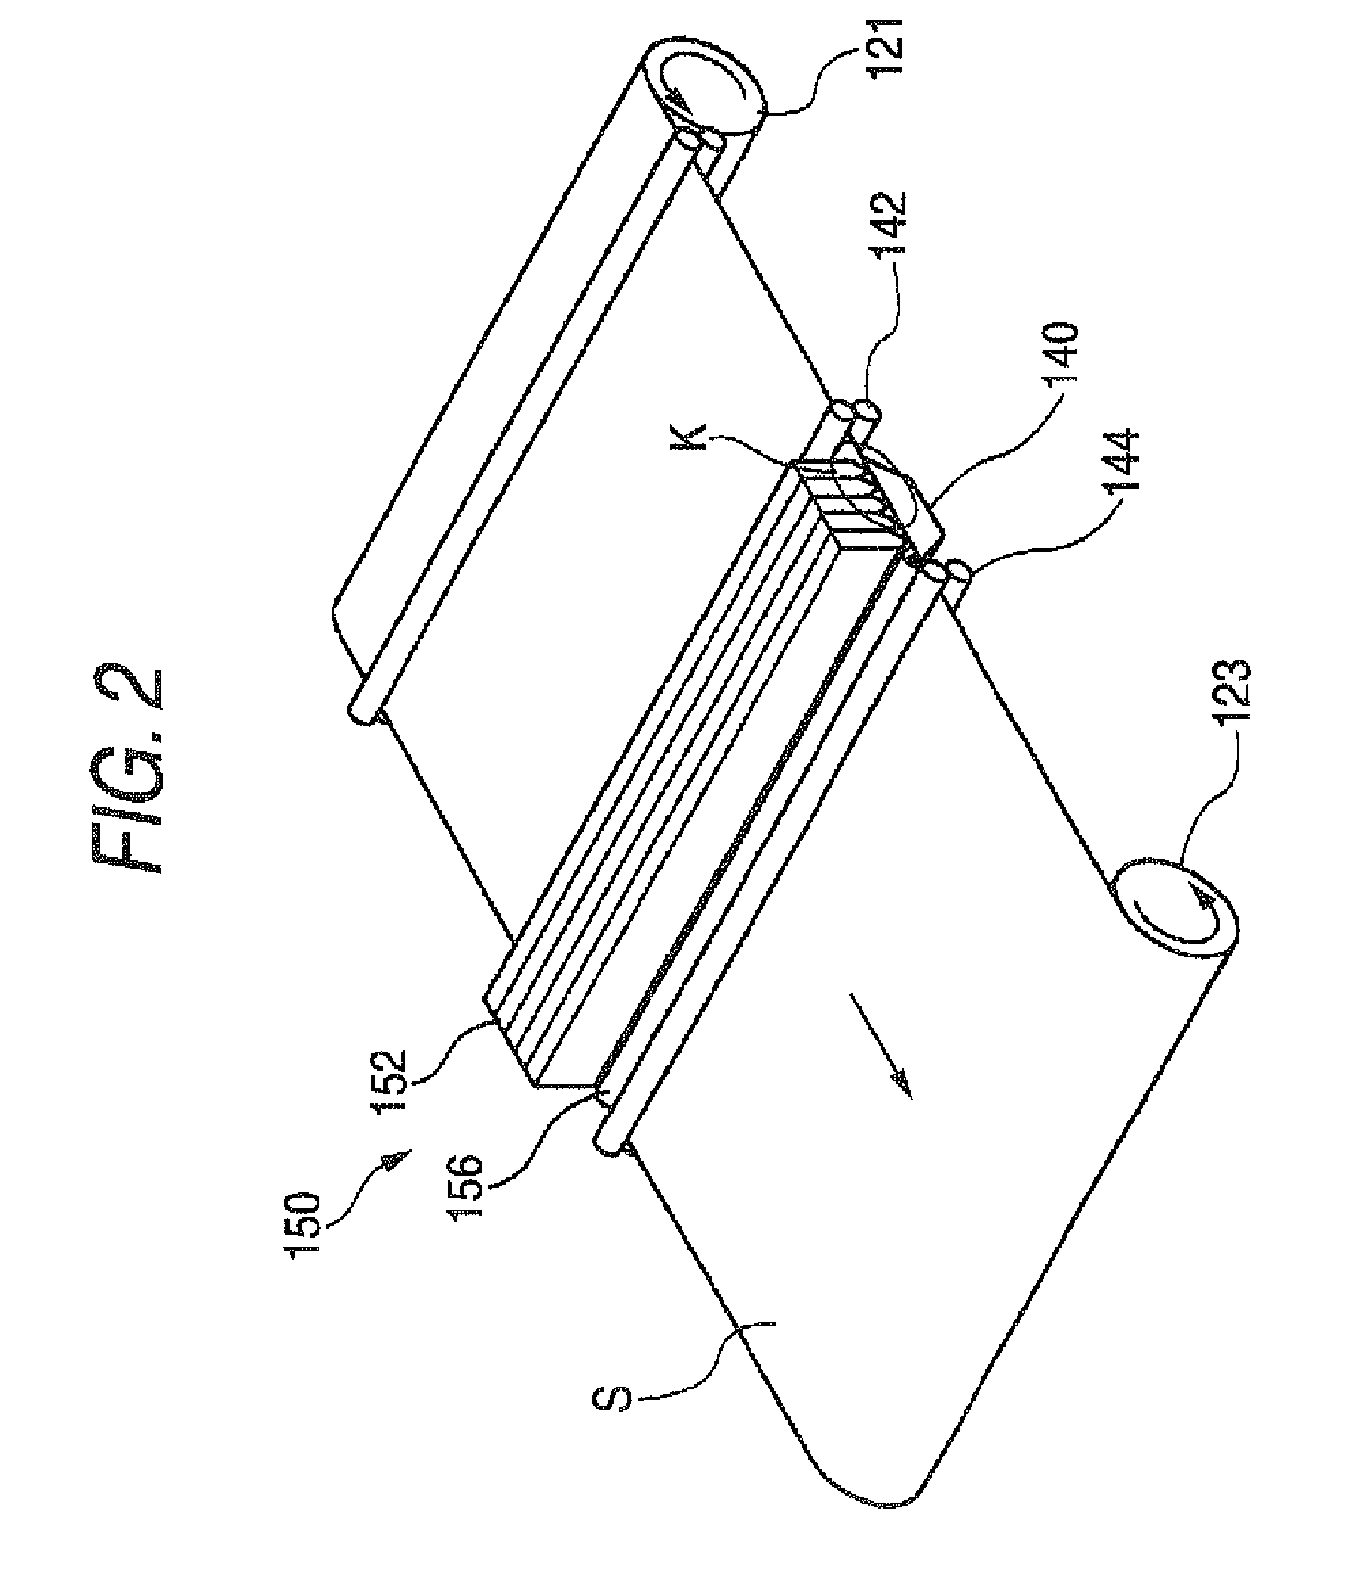 Inkjet recording apparatus with plural heads and suction unit